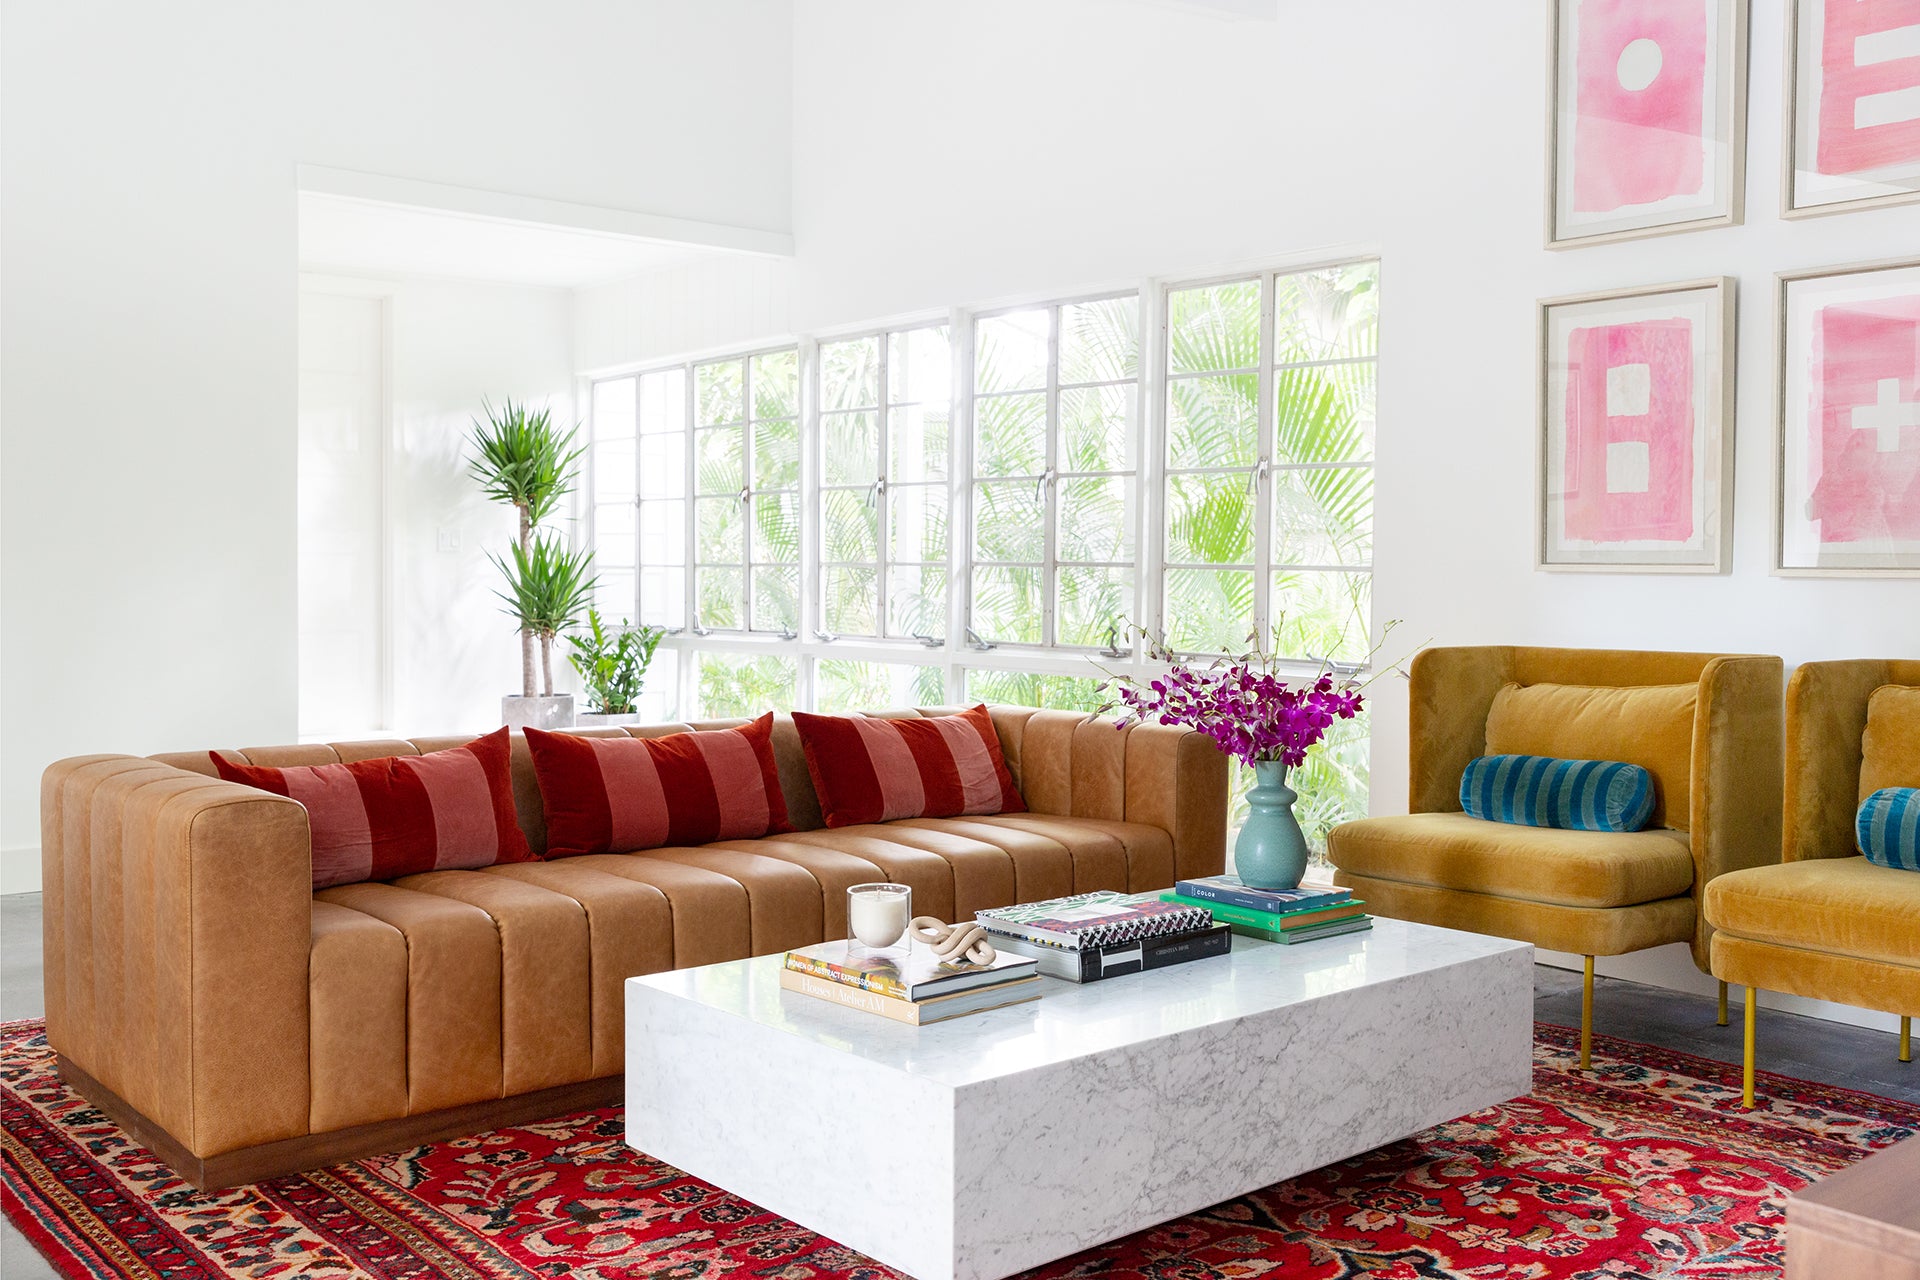 A camel brown squared sofa with red and coral striped throw pillows sits in a seating area with two gold velvet accent chairs with teal striped velvet pillows. A large white marble coffee table sits in the middle atop a traditional patterned red rug.